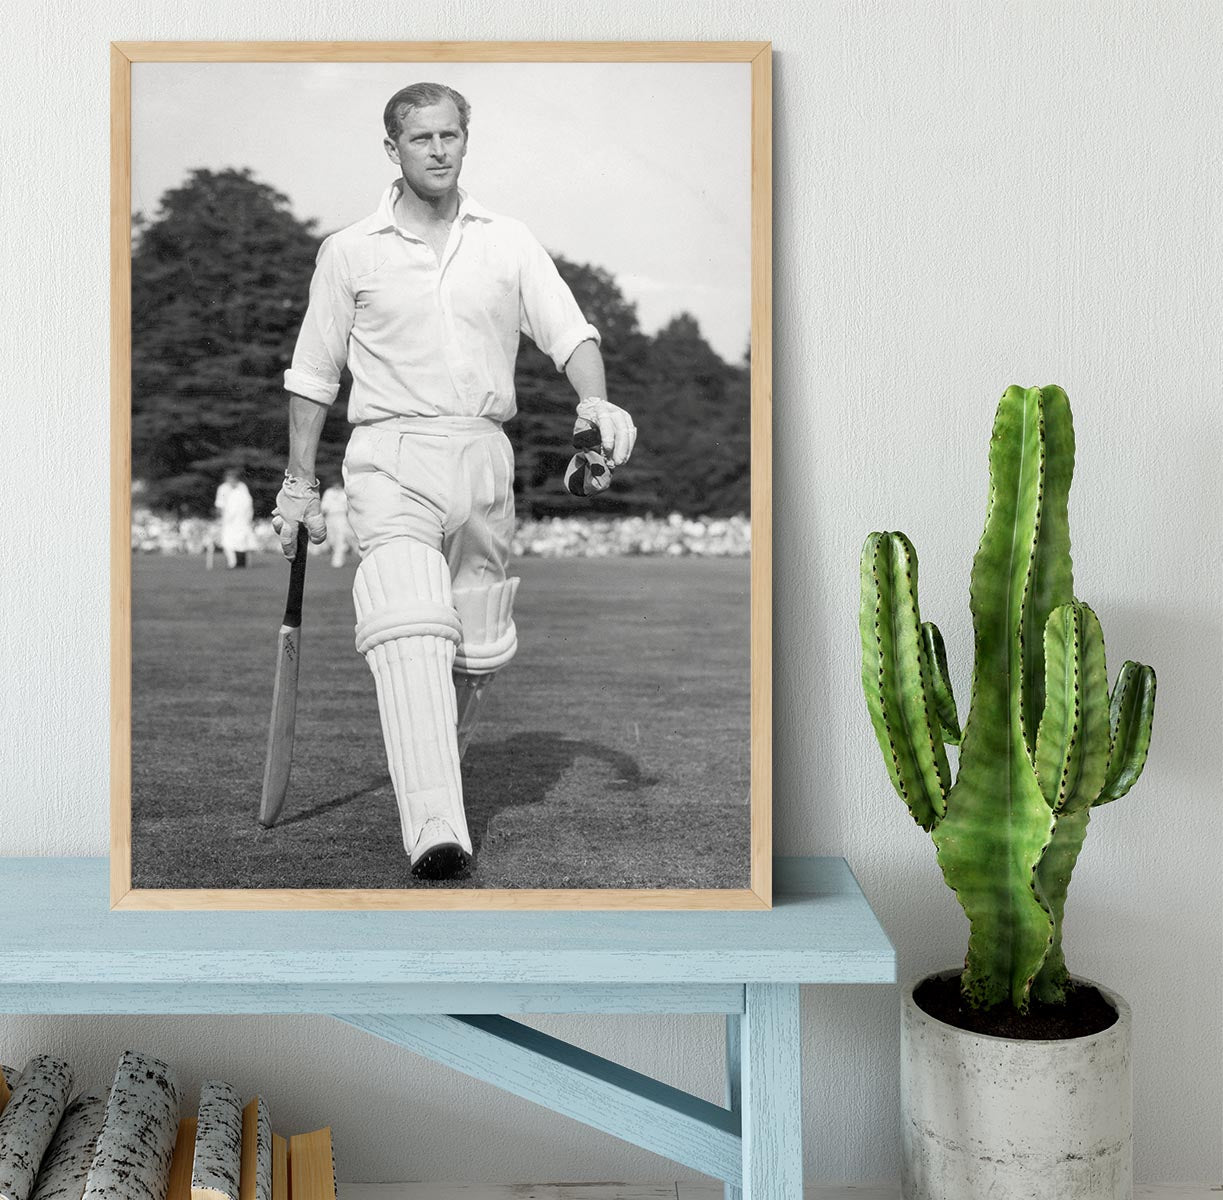 Prince Philip as cricket captain in a charity match Framed Print - Canvas Art Rocks - 4